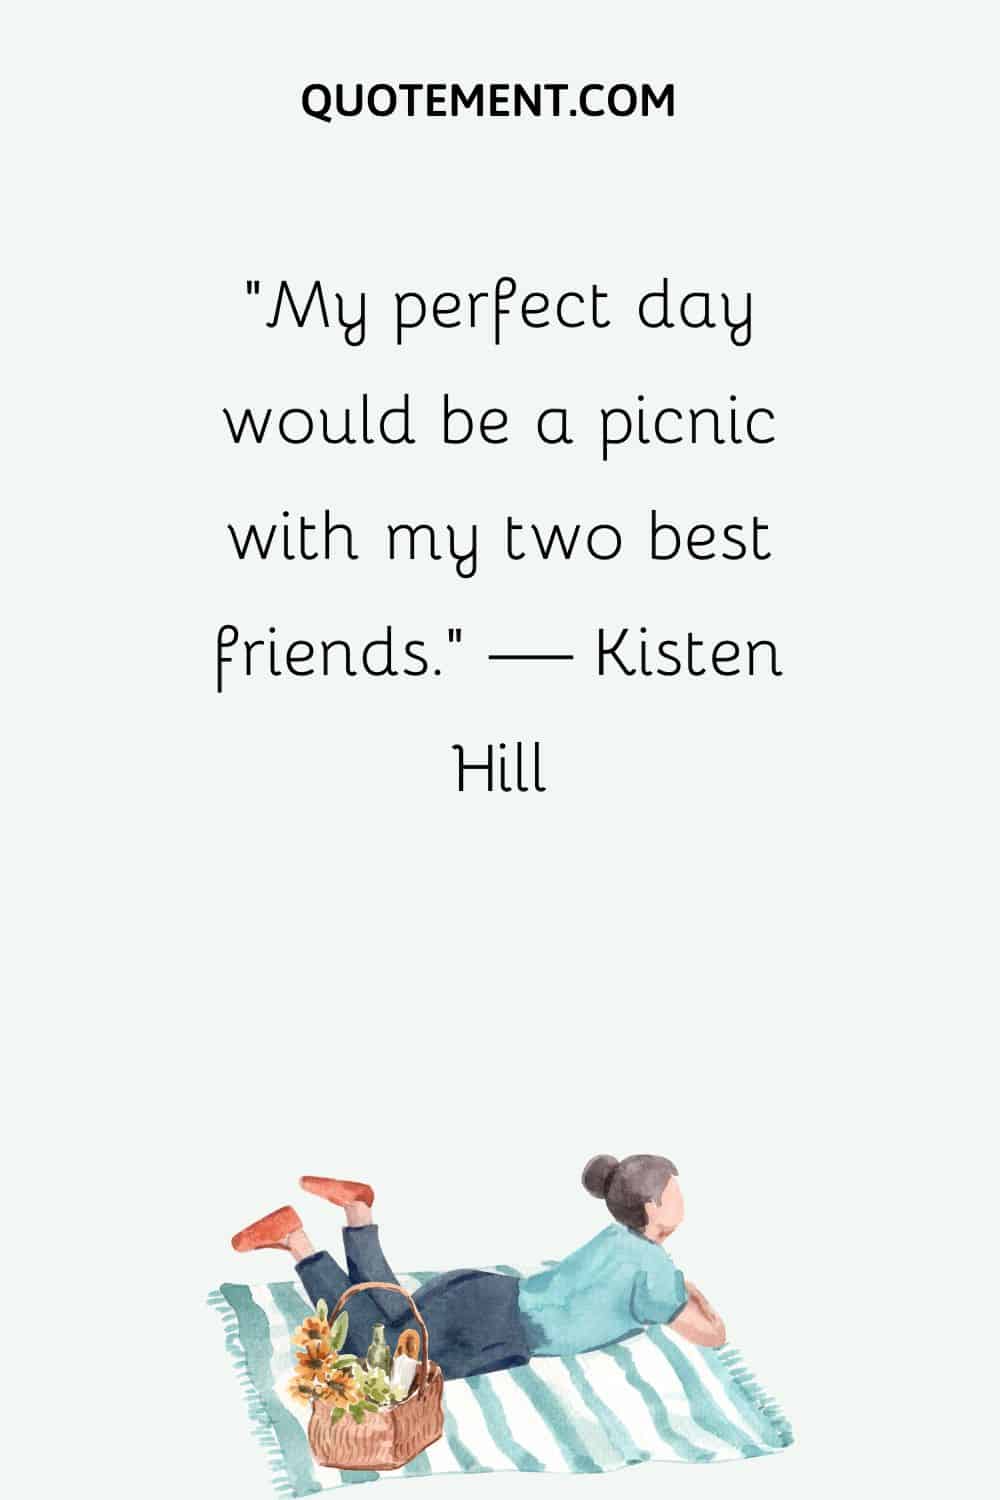 My perfect day would be a picnic with my two best friends